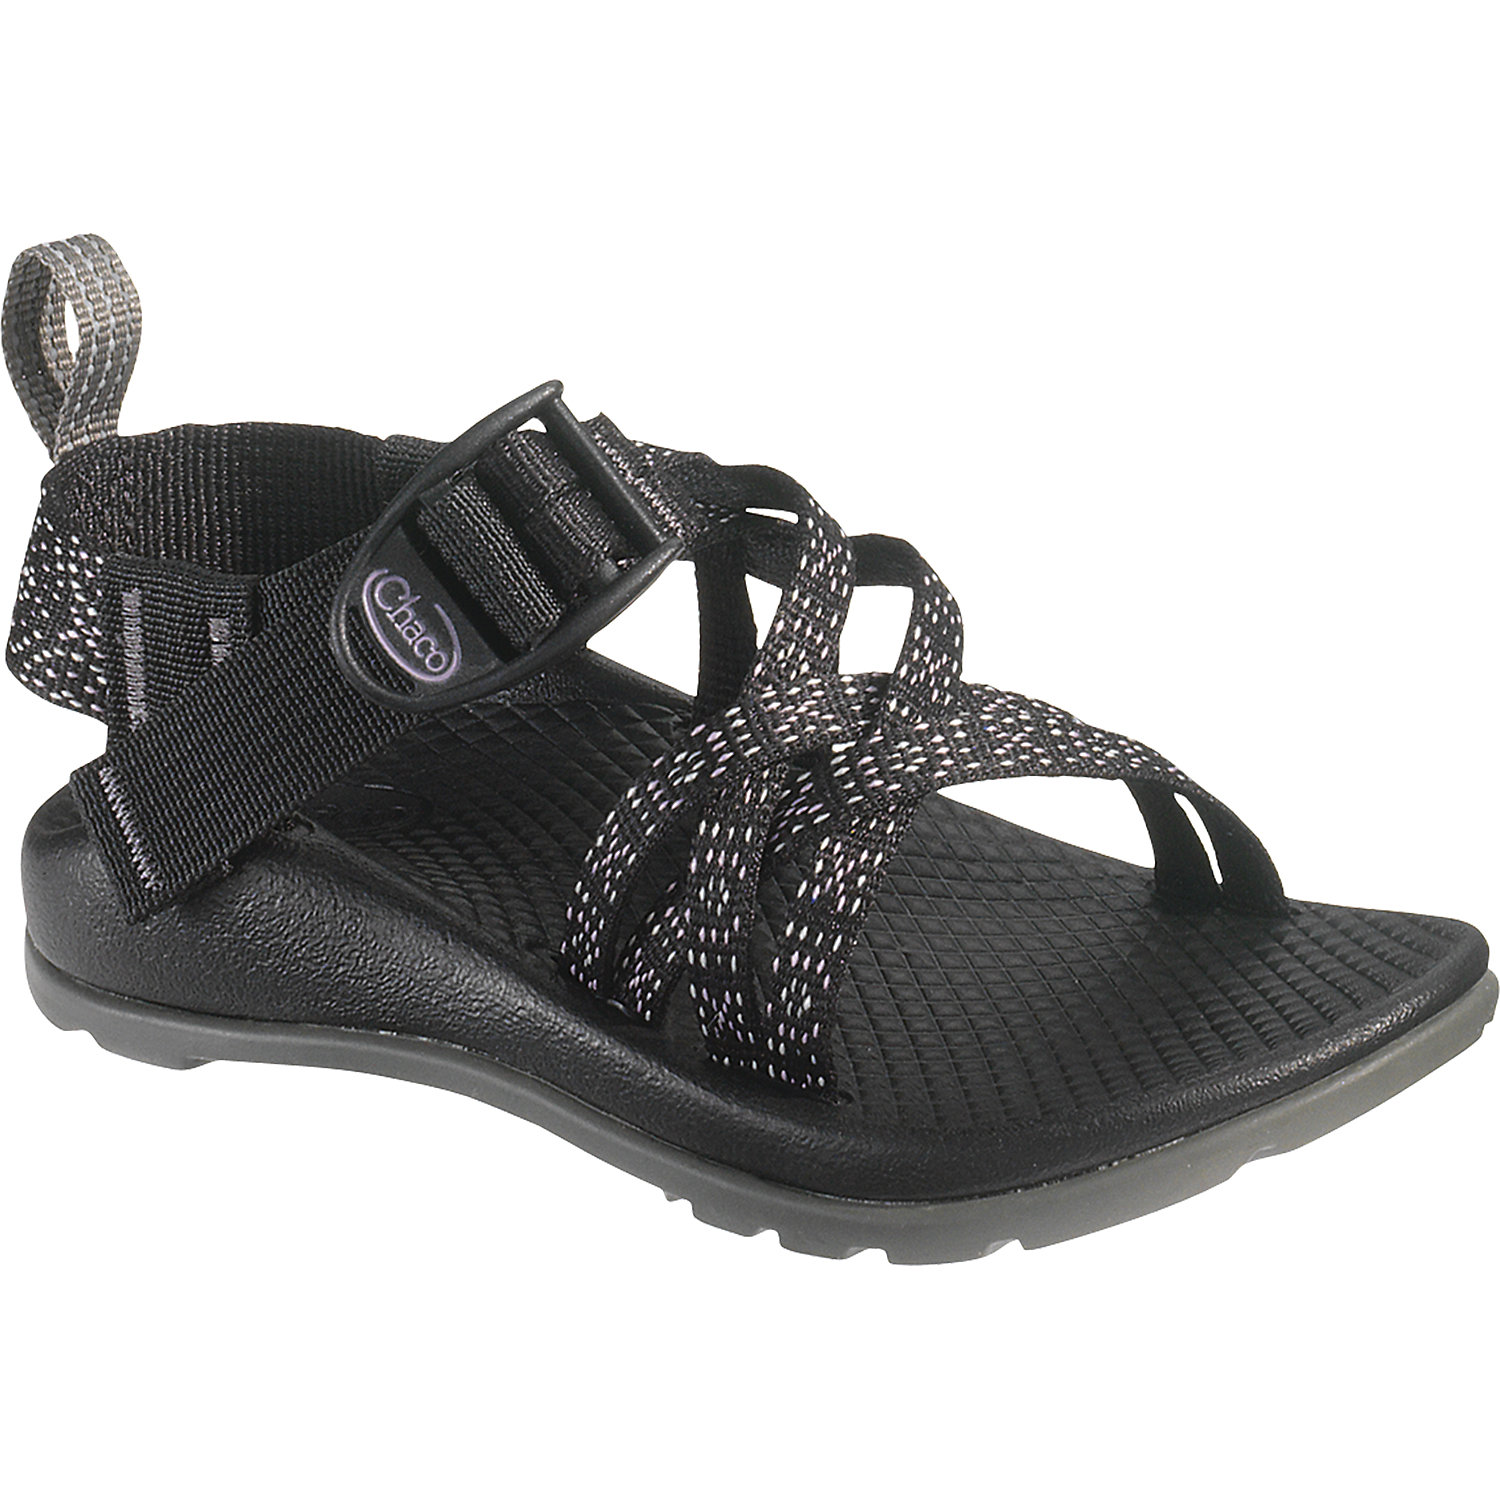 Chaco Kids ZX/1 EcoTread Sandal